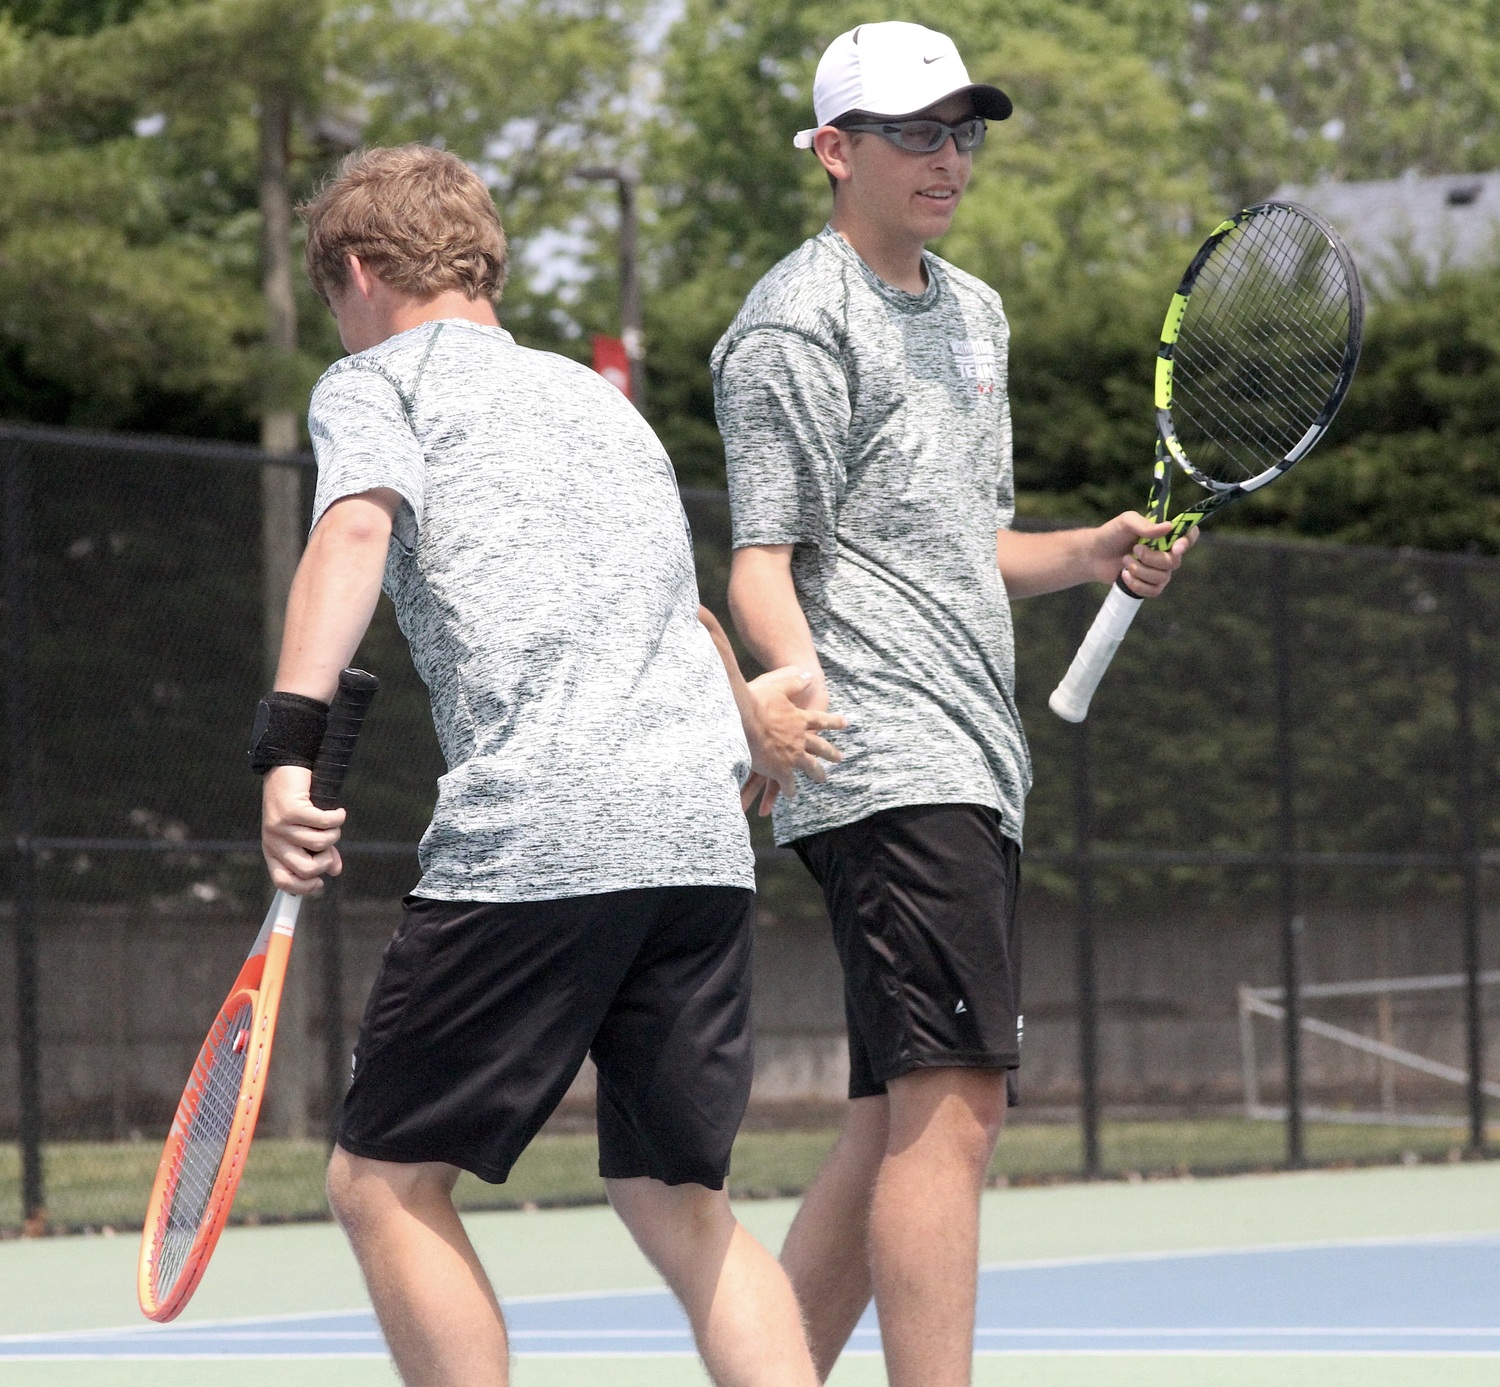 Westhampton Beach sophomore Giancarlo Volpe celebre a point with doubles partner Bobby Stabile. DESIRÉE KEEGAN